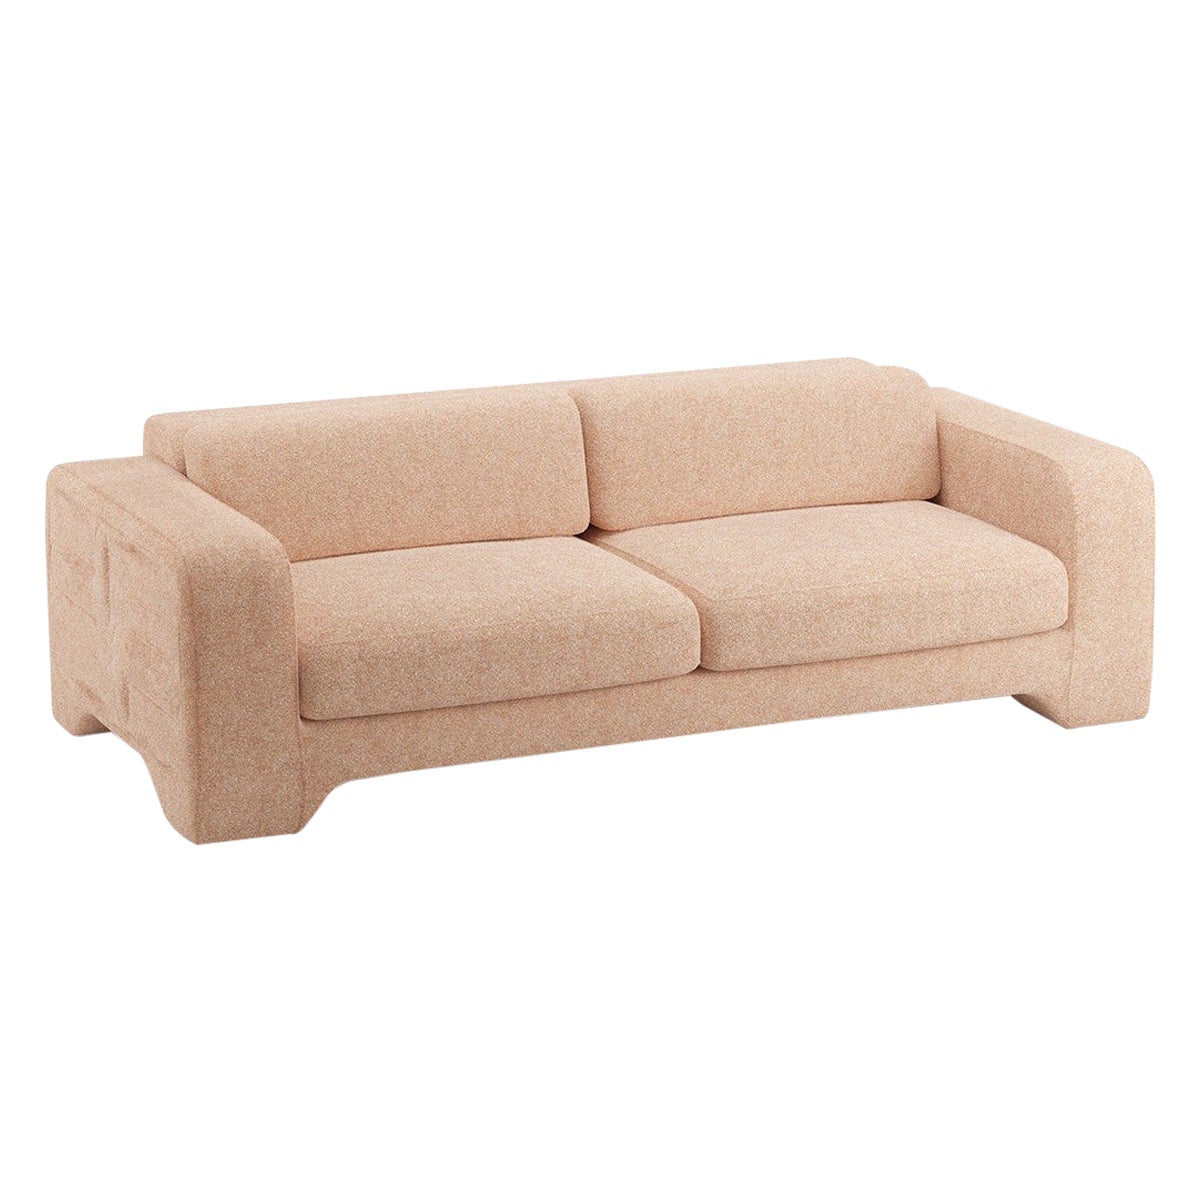 Popus Editions Giovanna 2.5 Seater Sofa in Nude Antwerp Linen Upholstery For Sale